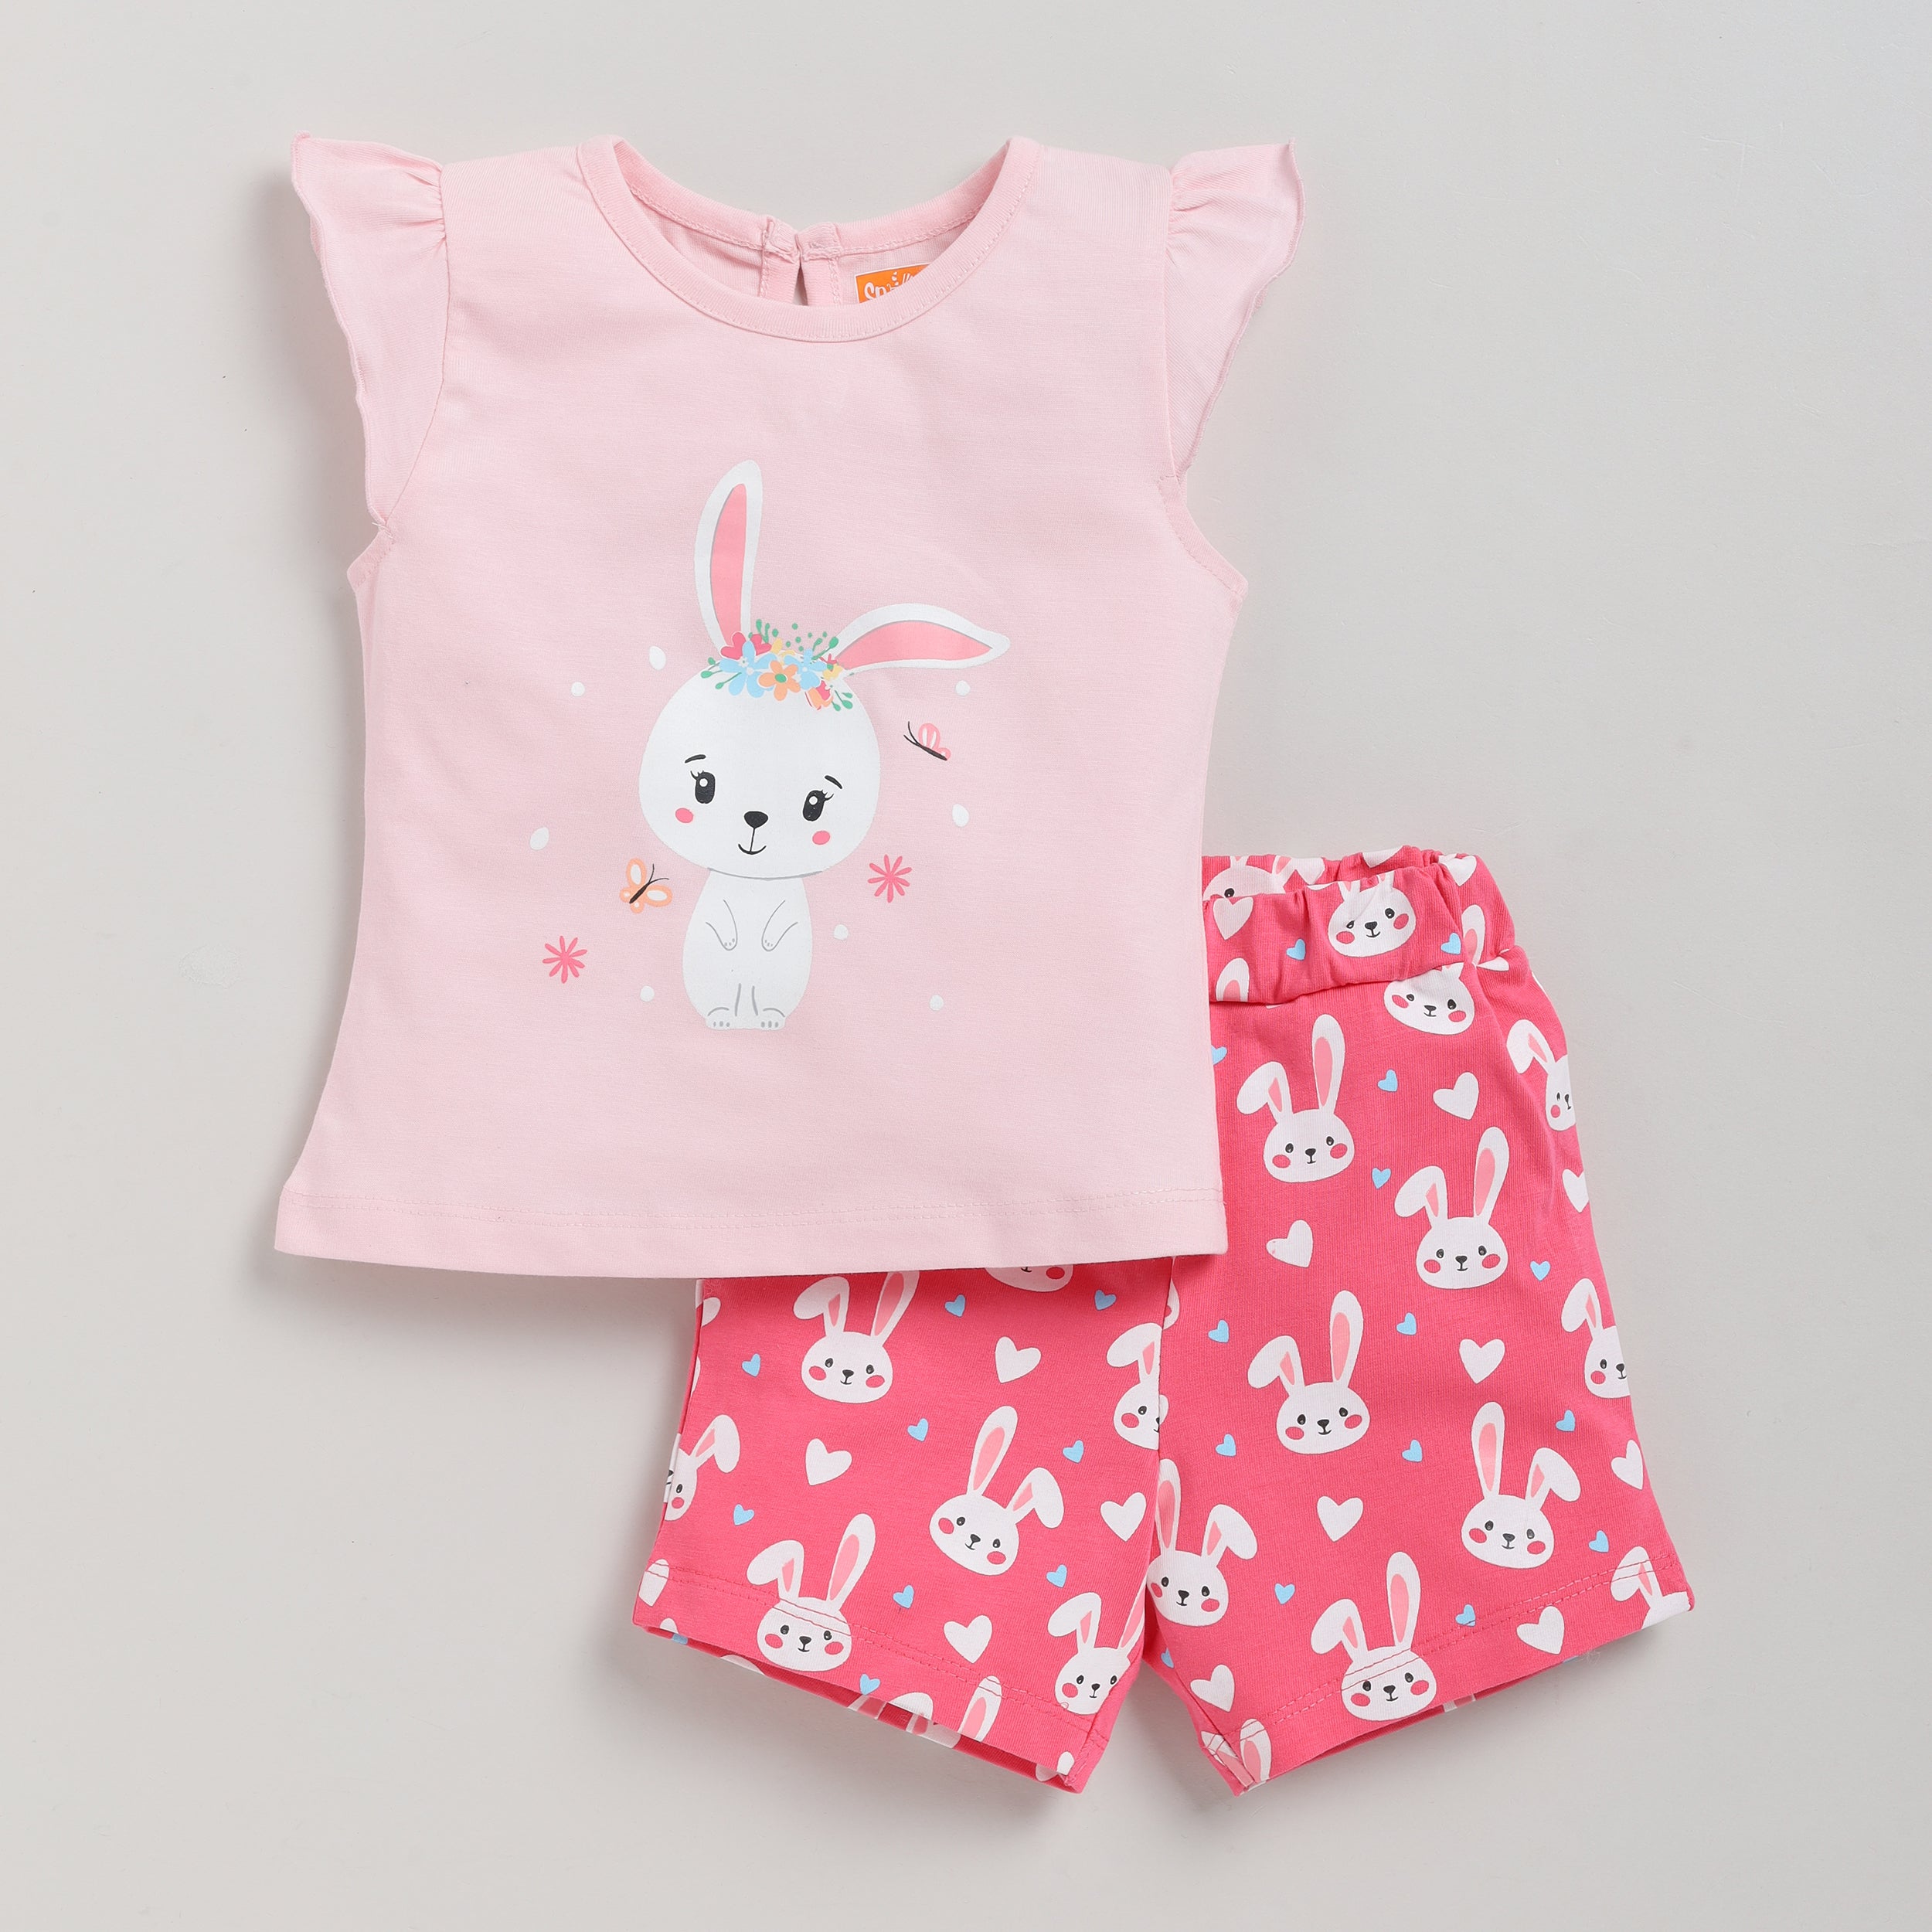 Snuggly Monkey Girls Pink Bunny Print Top with Shorts